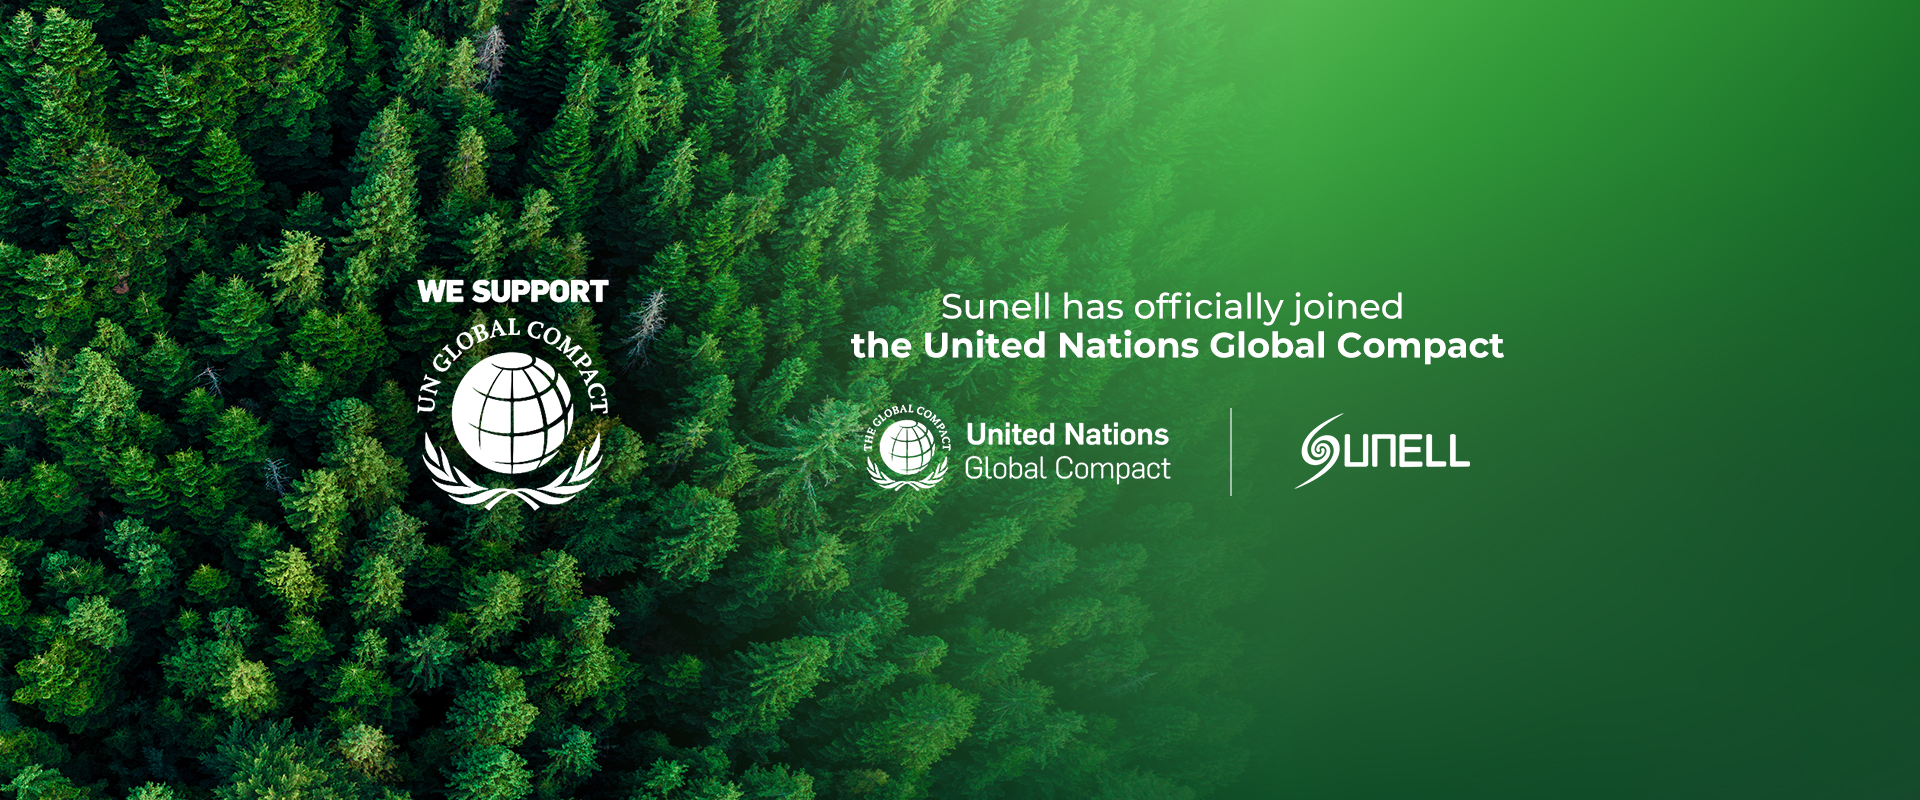 Sunell_has_officially_joined_the_United_Nations_Global_Compact.jpg